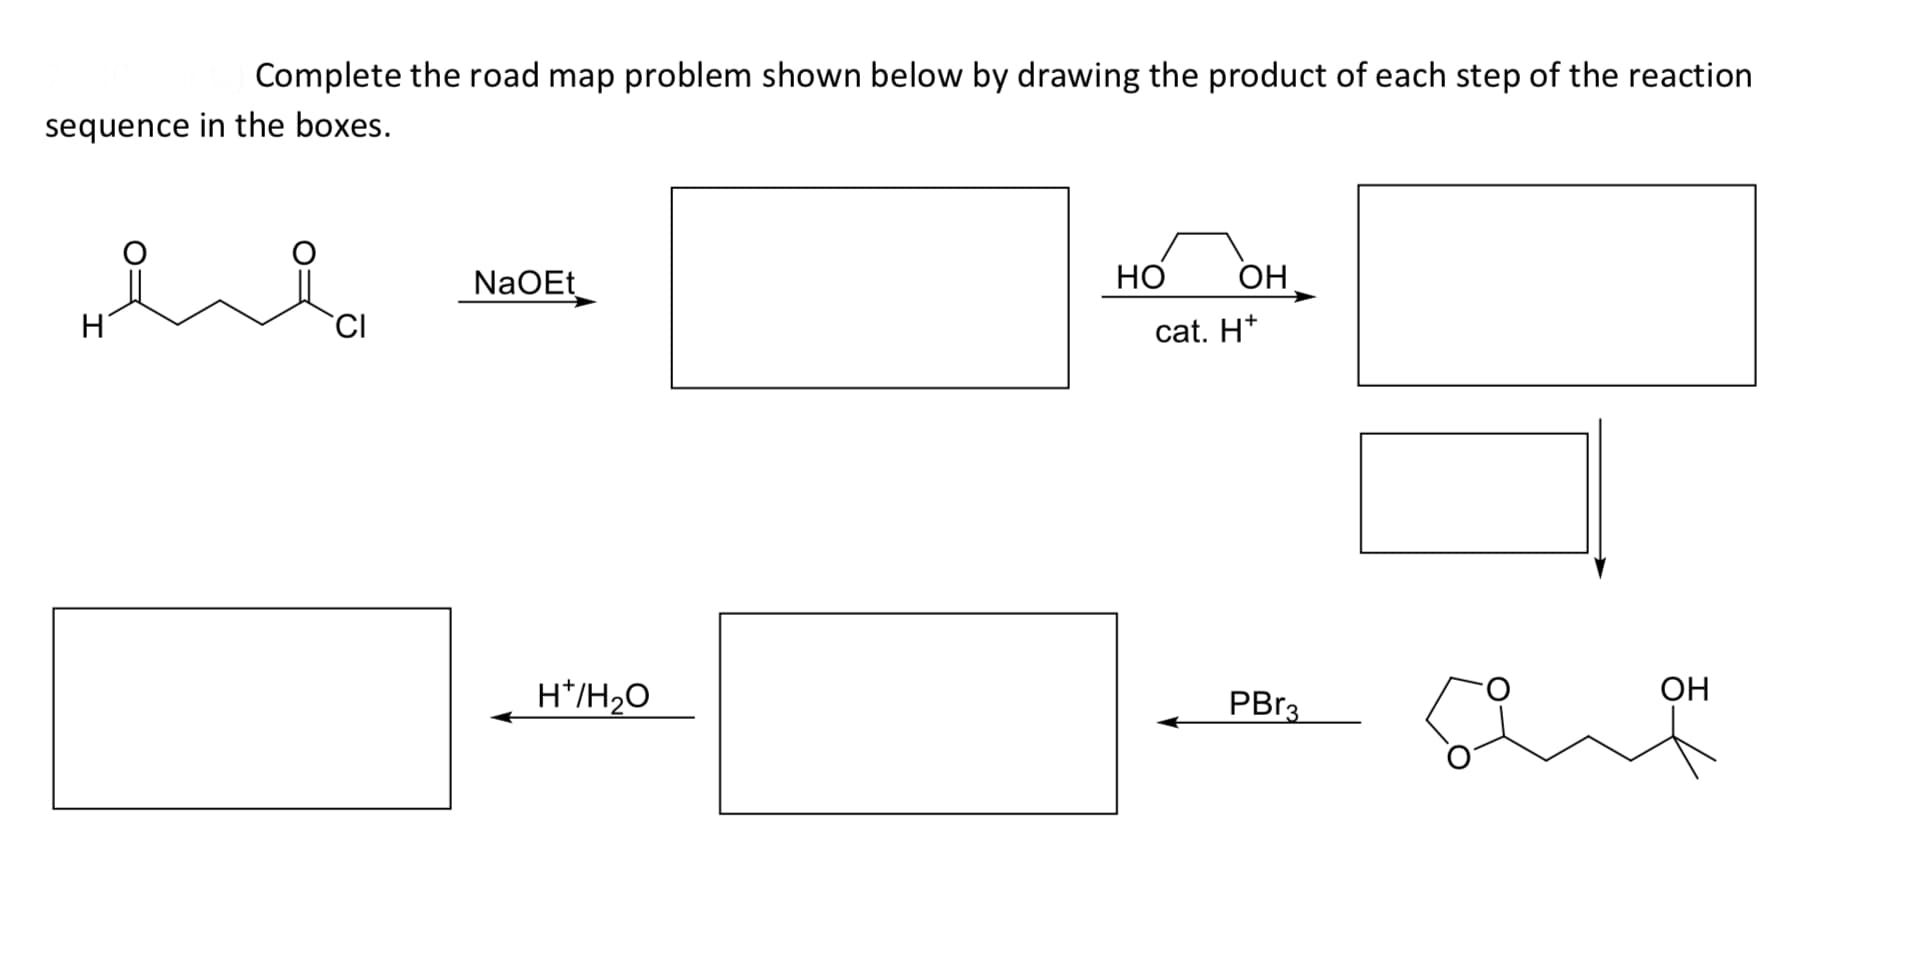 Complete the road map problem shown below by drawing the product of each step of the reaction
sequence in the boxes.
NaOEt
OH
H
CI
cat. H*
H*/H2O
PBR3
ОН
